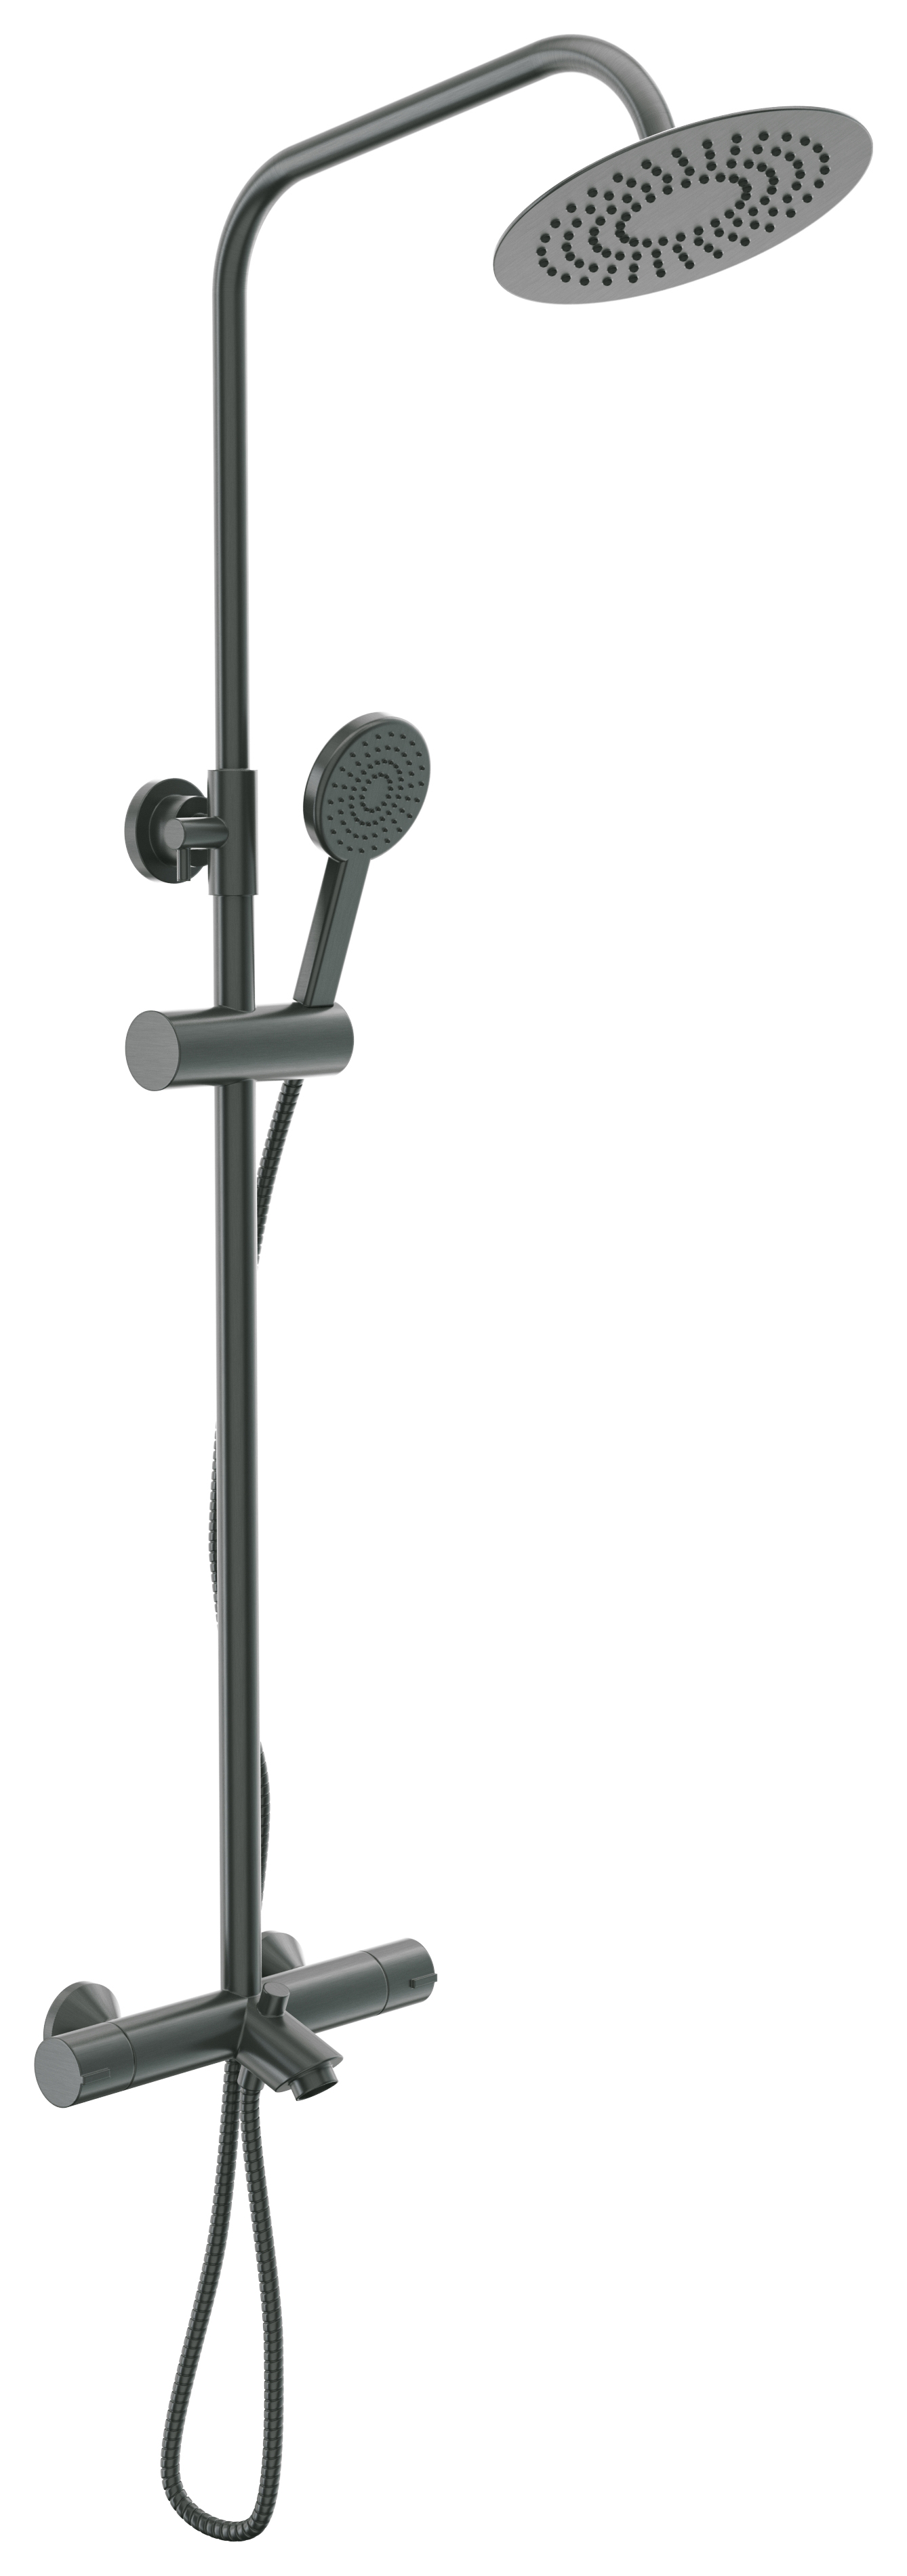 Image of Hadleigh Wall Mounted Dual Outlet Bath Shower Mixer - Anthracite